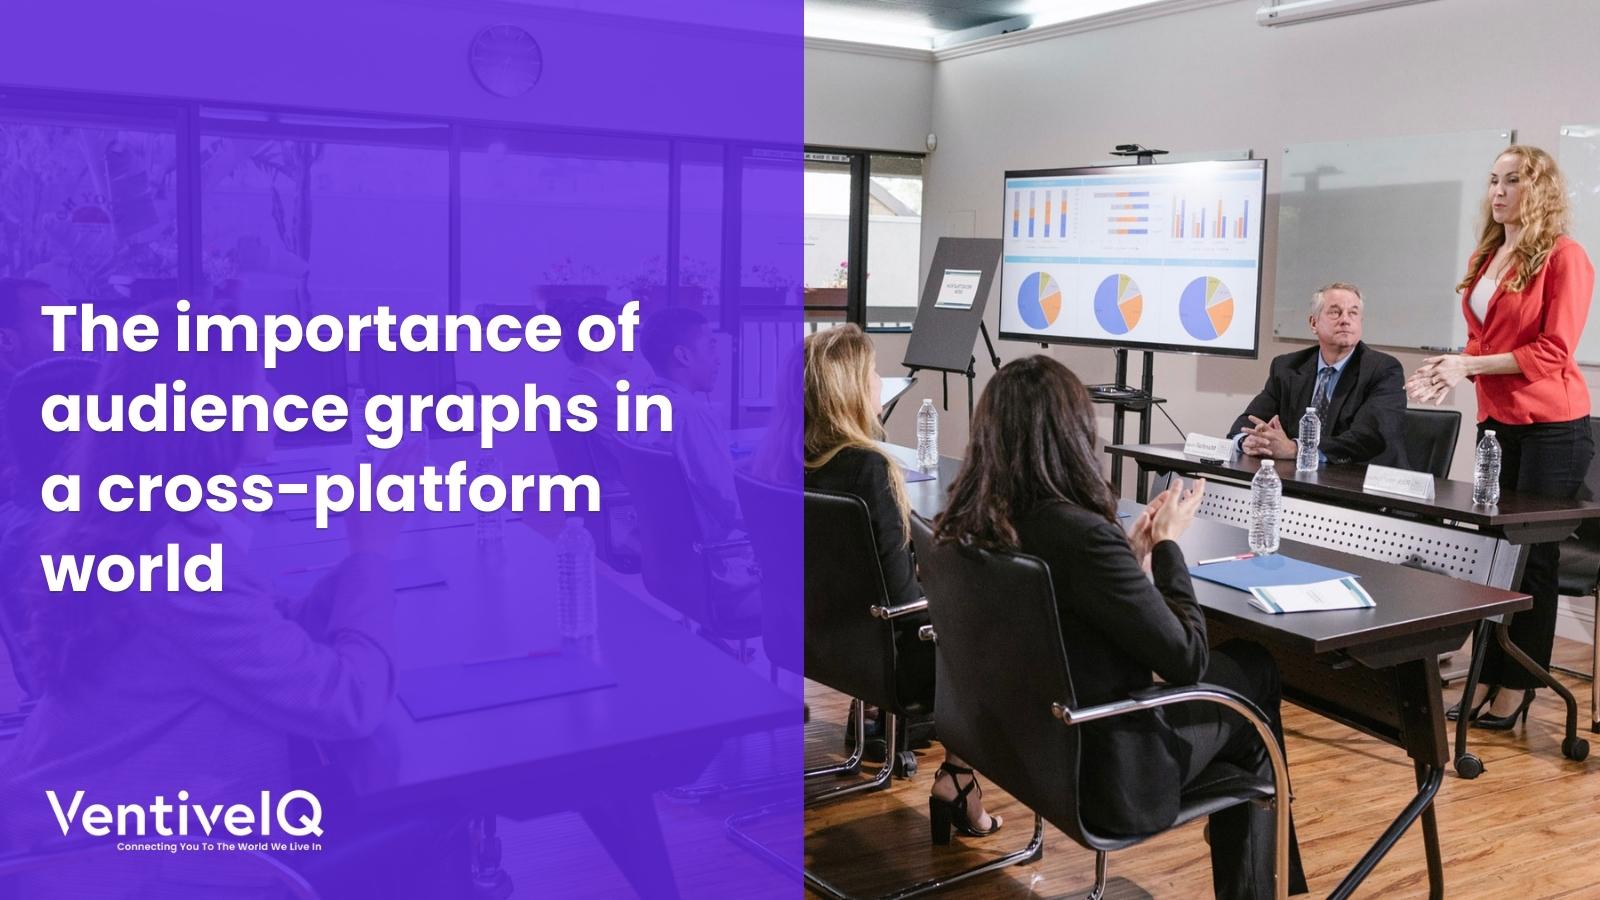 The importance of audience graphs in a cross-platform world